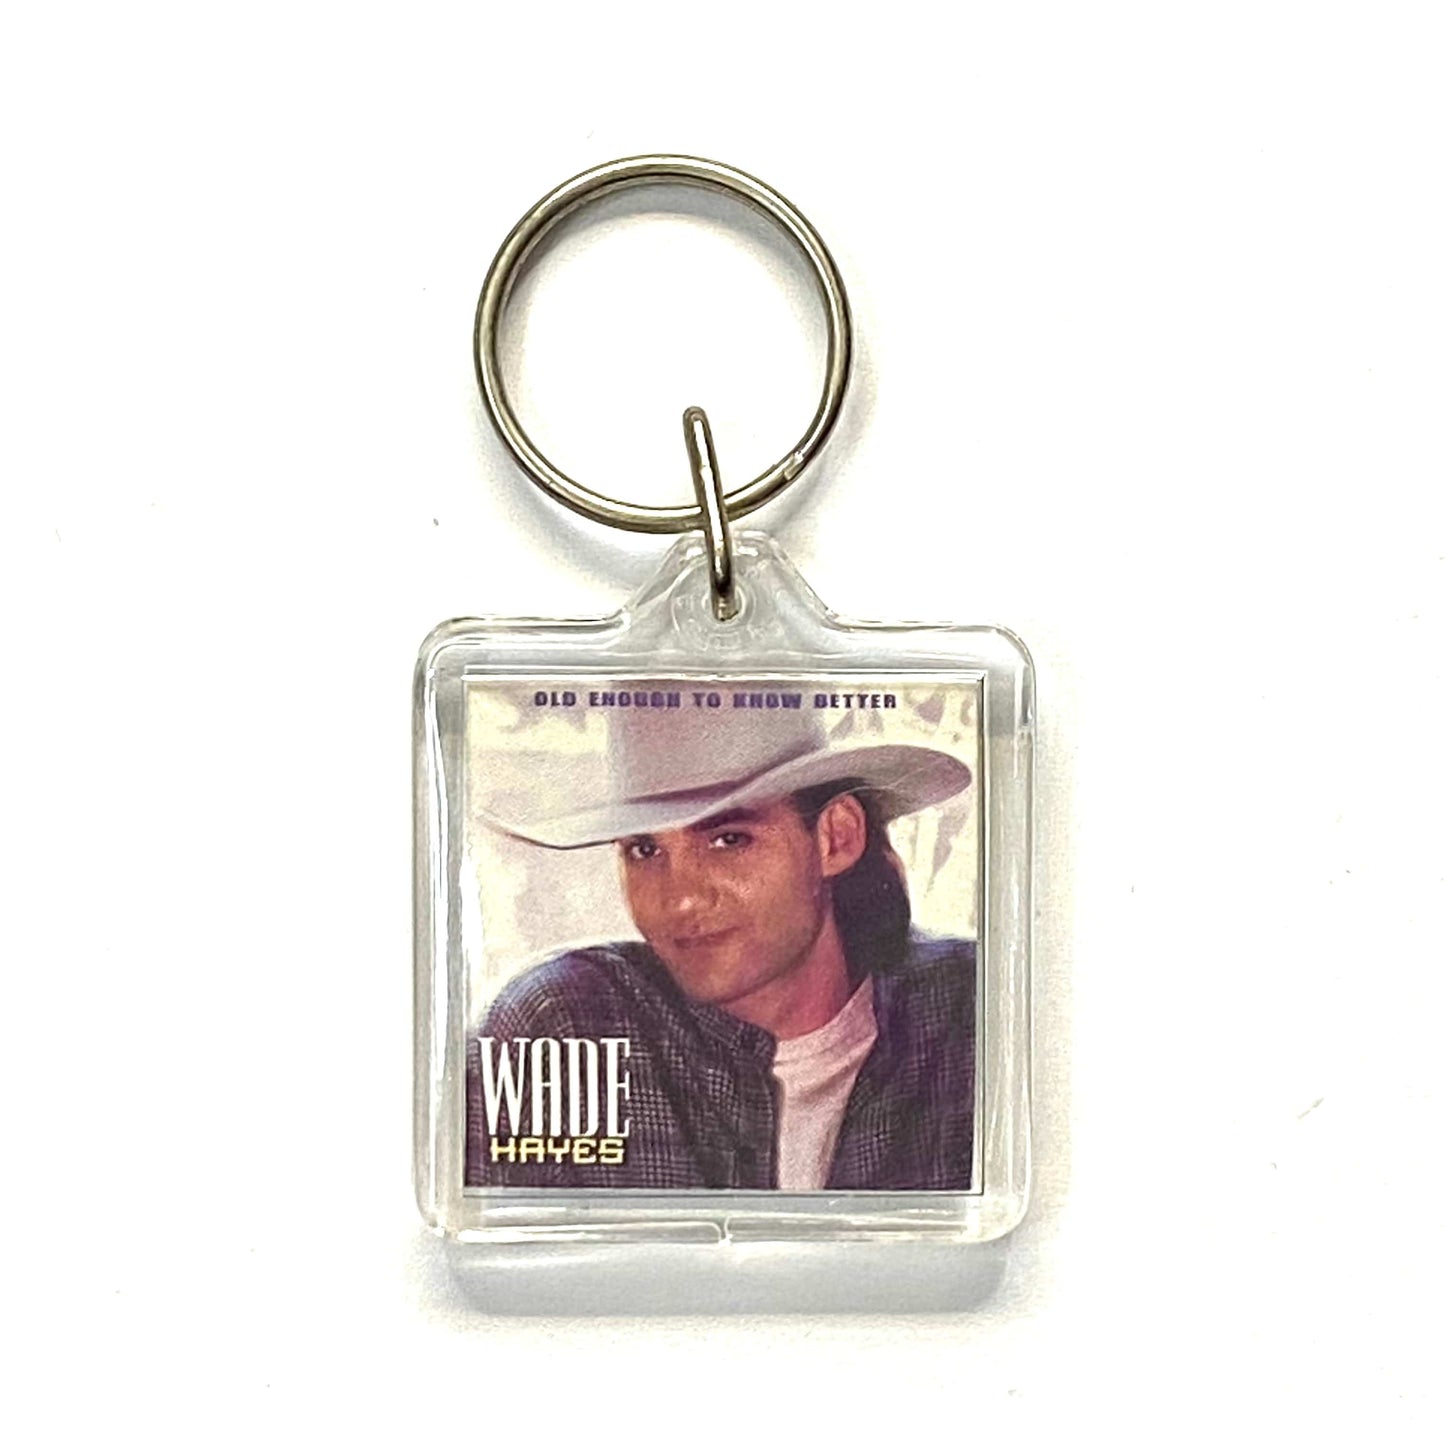 Vintage Wade Hayes "Old Enough To Know Better" Travel Souvenir Keychain Key Ring Square Clear Acrylic